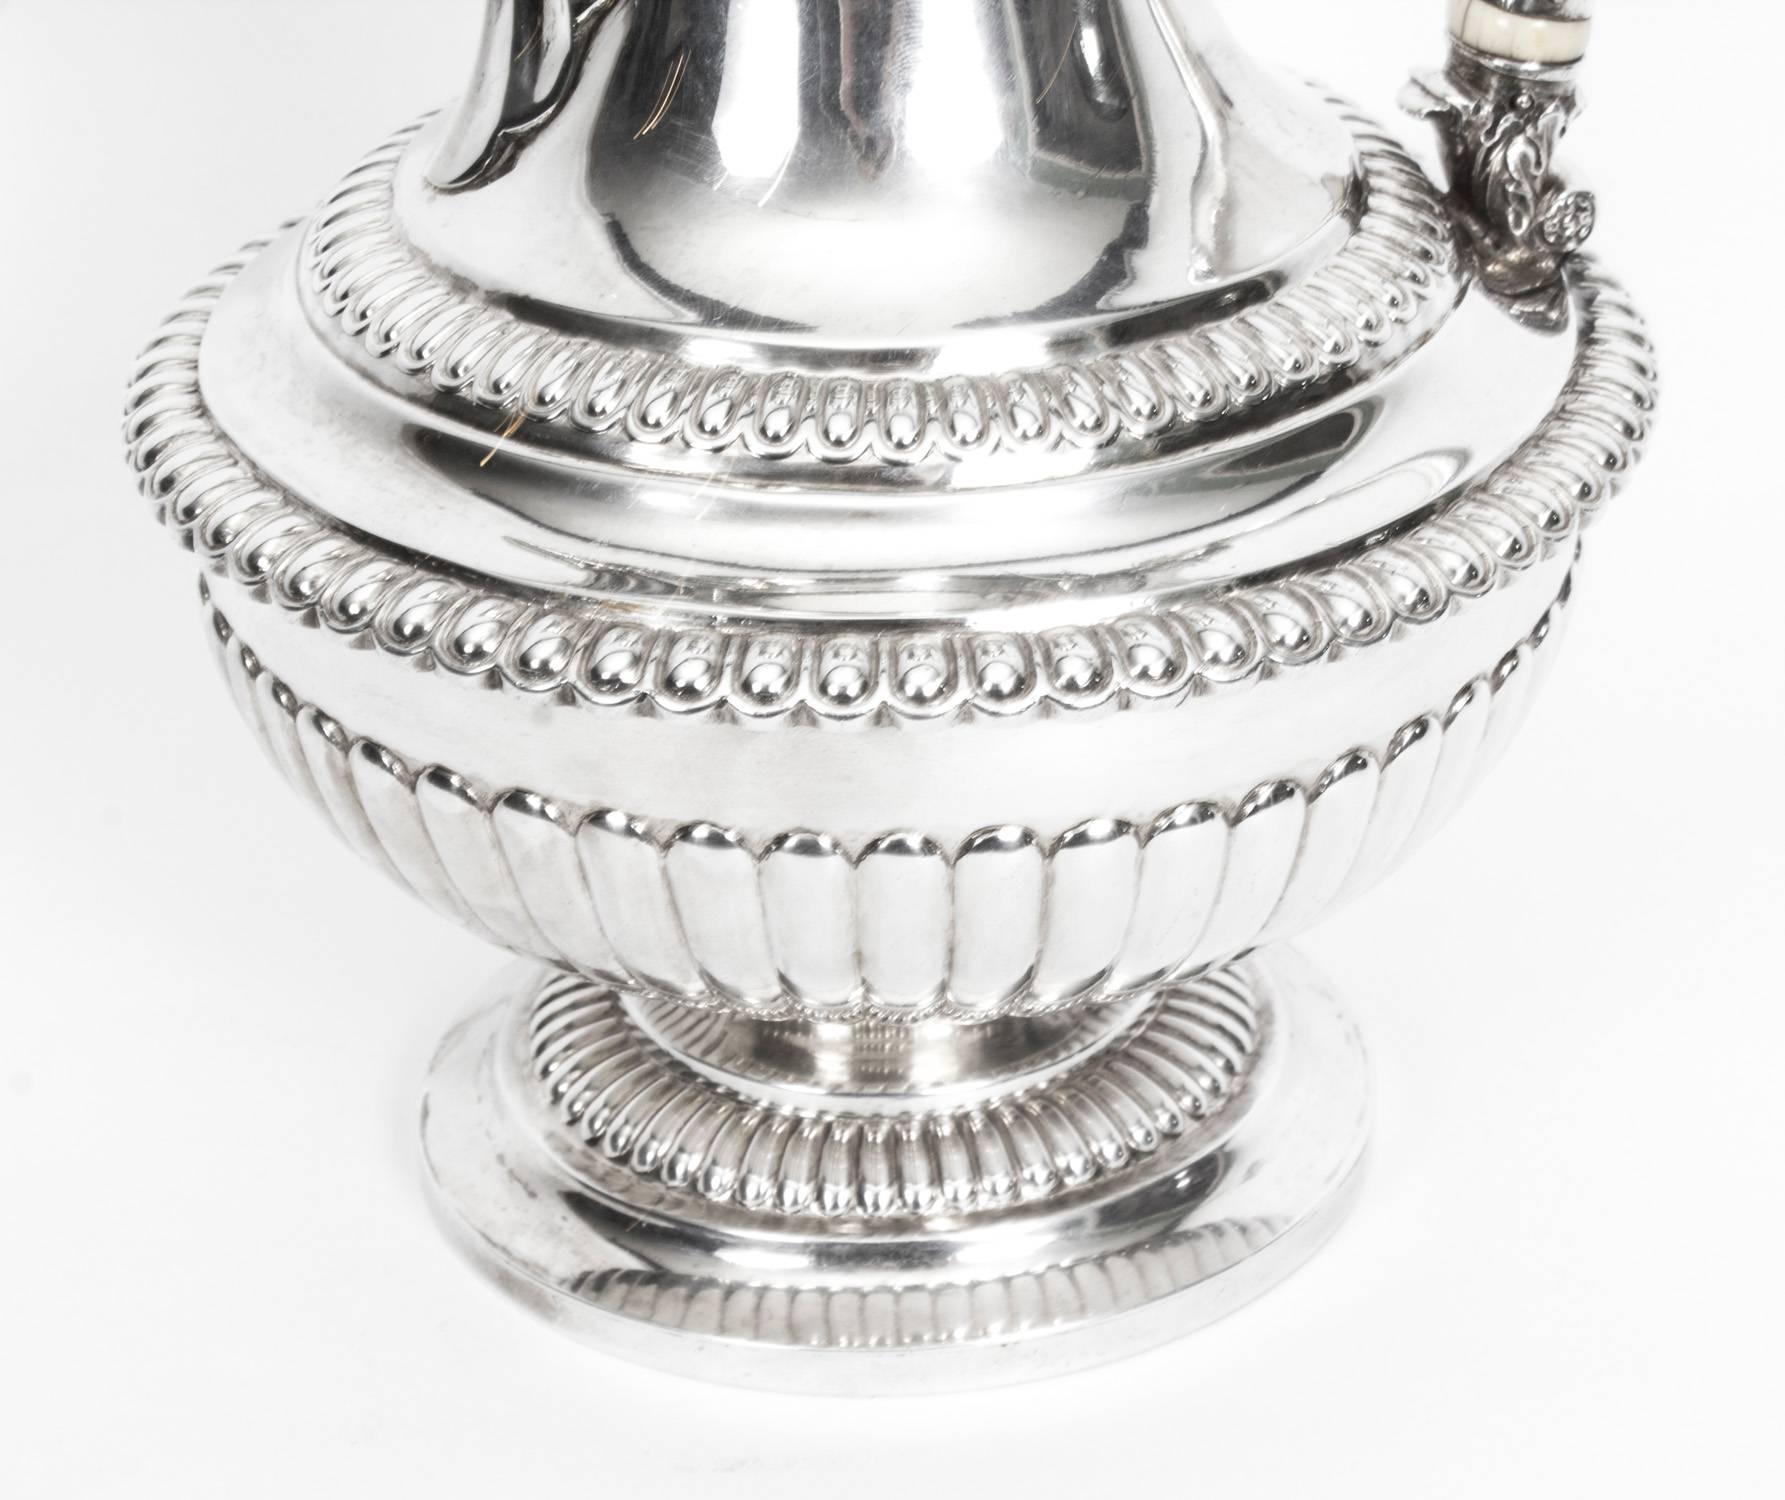 This is a really superb quality antique sterling silver coffee pot /ewer with hallmarks for London 1818 and the makers mark of one of the most celebrated silversmiths  Rebecca Emes & Edward Barnard.

It has stunning gadrooned and reeded